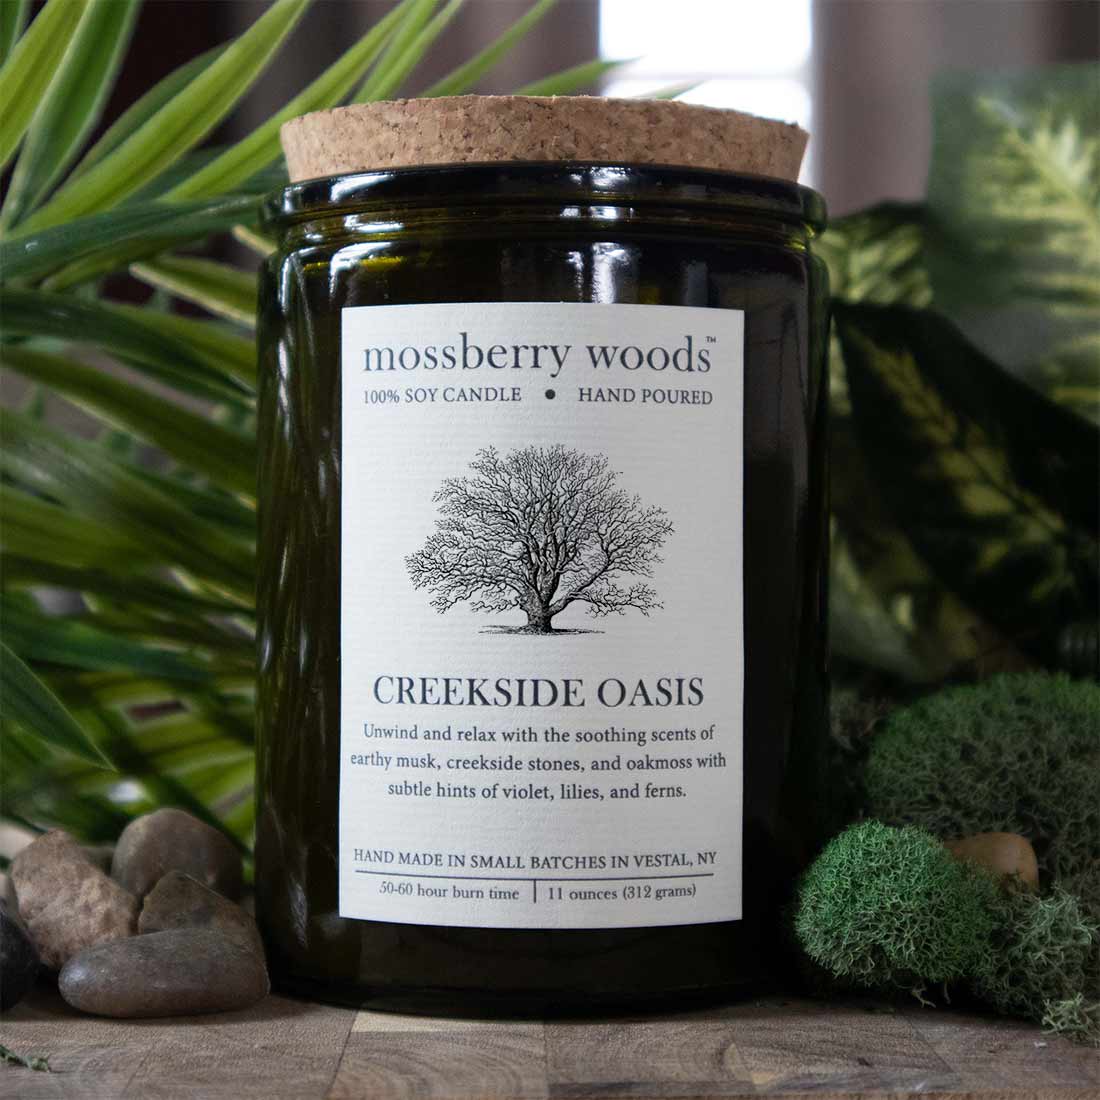 Creekside Oasis soy candle with fern, moss, and river stones